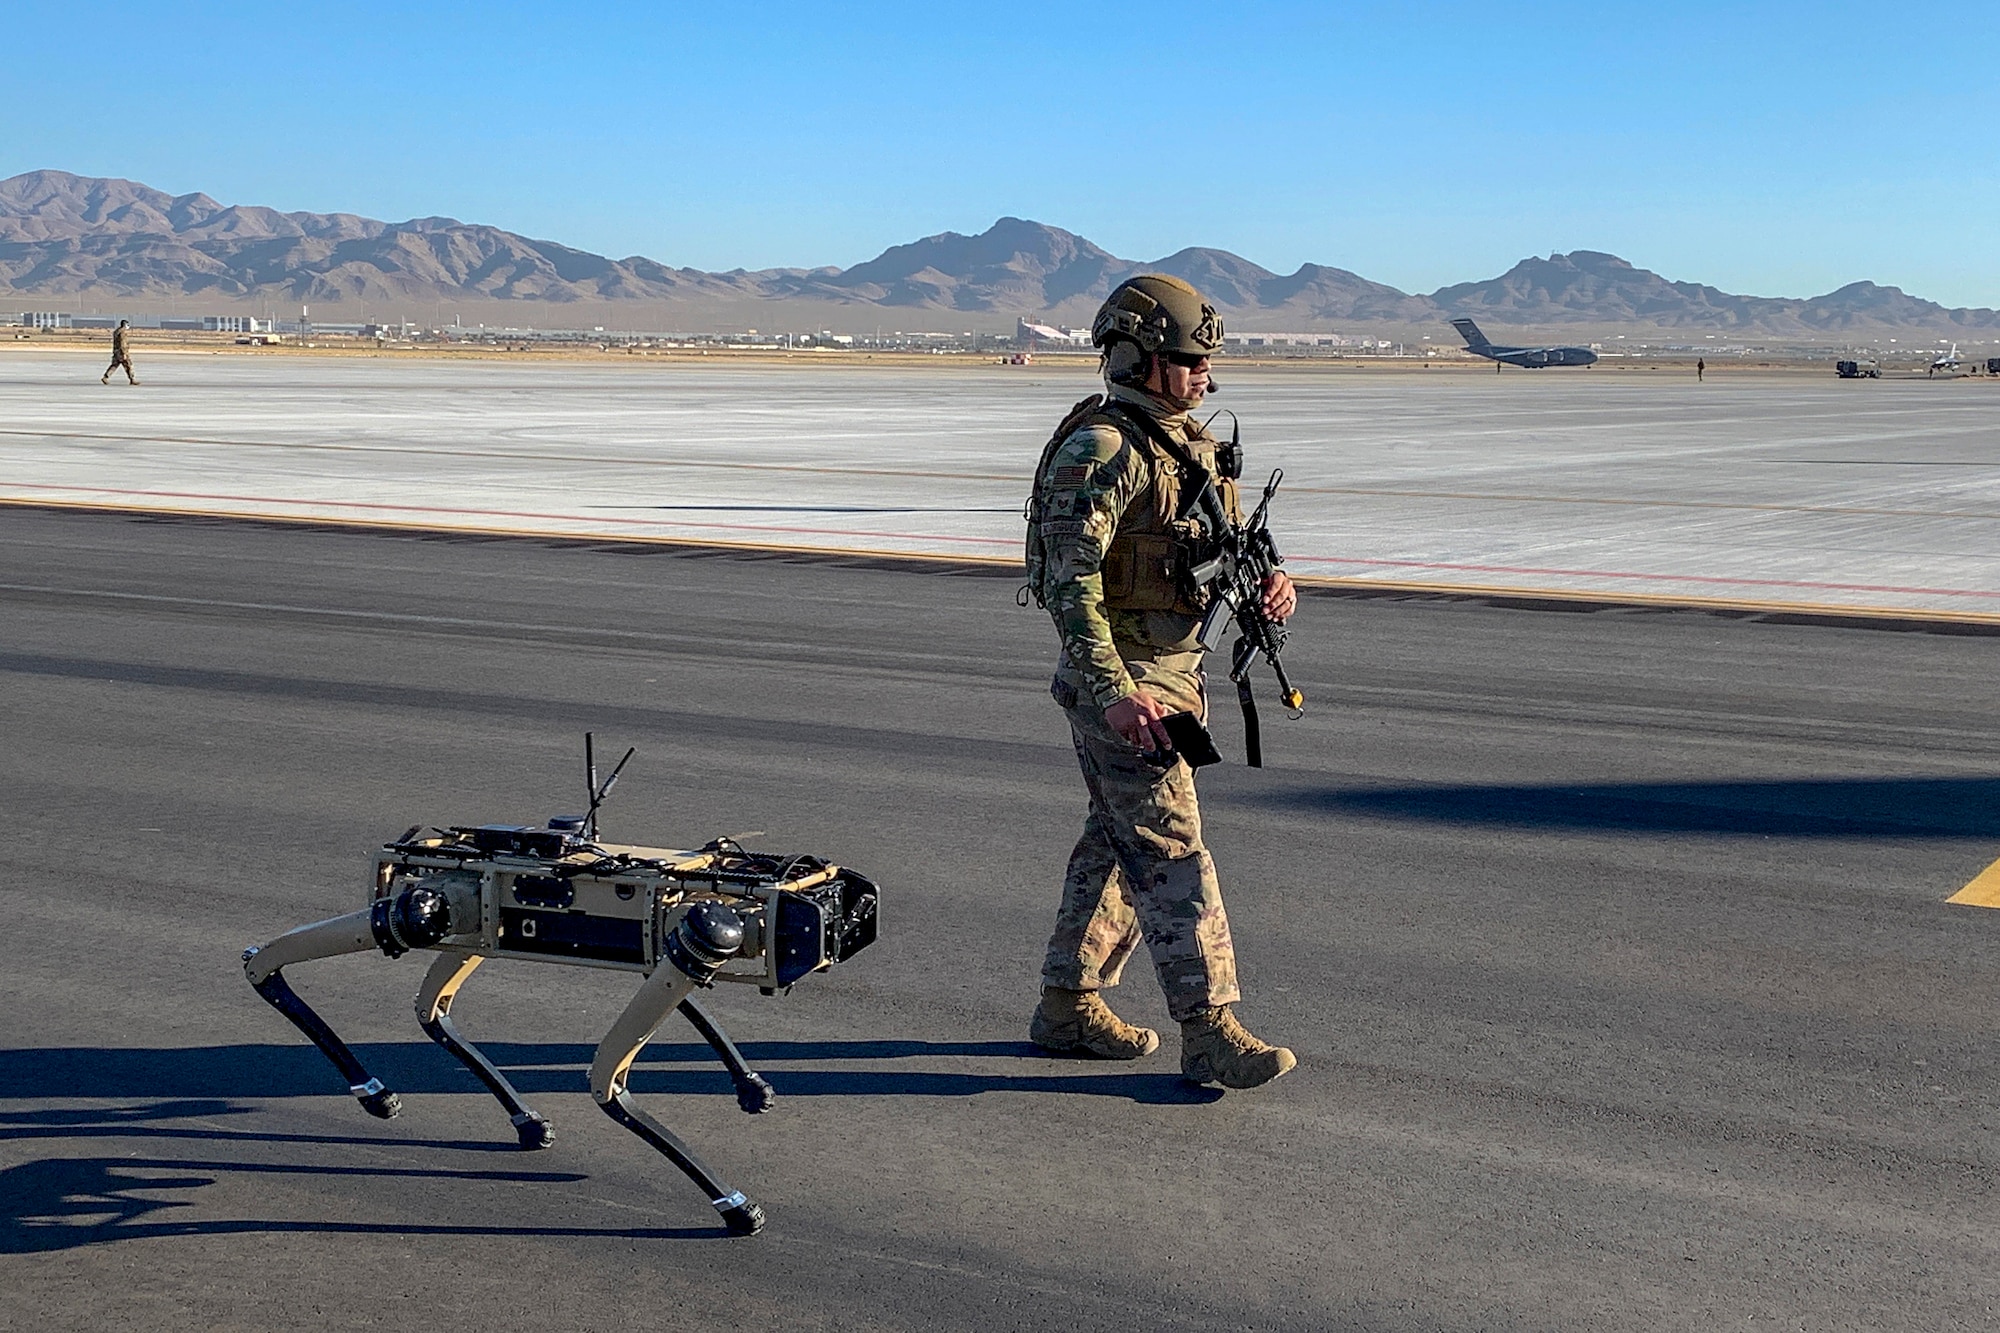 U.S. Air Force Tech. Sgt. Johnny Rodriguez, 321st Contingency Response Squadron force protection craftsman and lead defender for the CR team, walks with the robot dog during an agile combat employment exercise Sept. 3, 2020, at Nellis Air Force Base, Nevada. The robot dog is an experimental technology with the intent of aiding defenders to secure an airfield and is part of the Advance Battle Management System, which is being tested during ACE exercise. (Courtesy Photo)